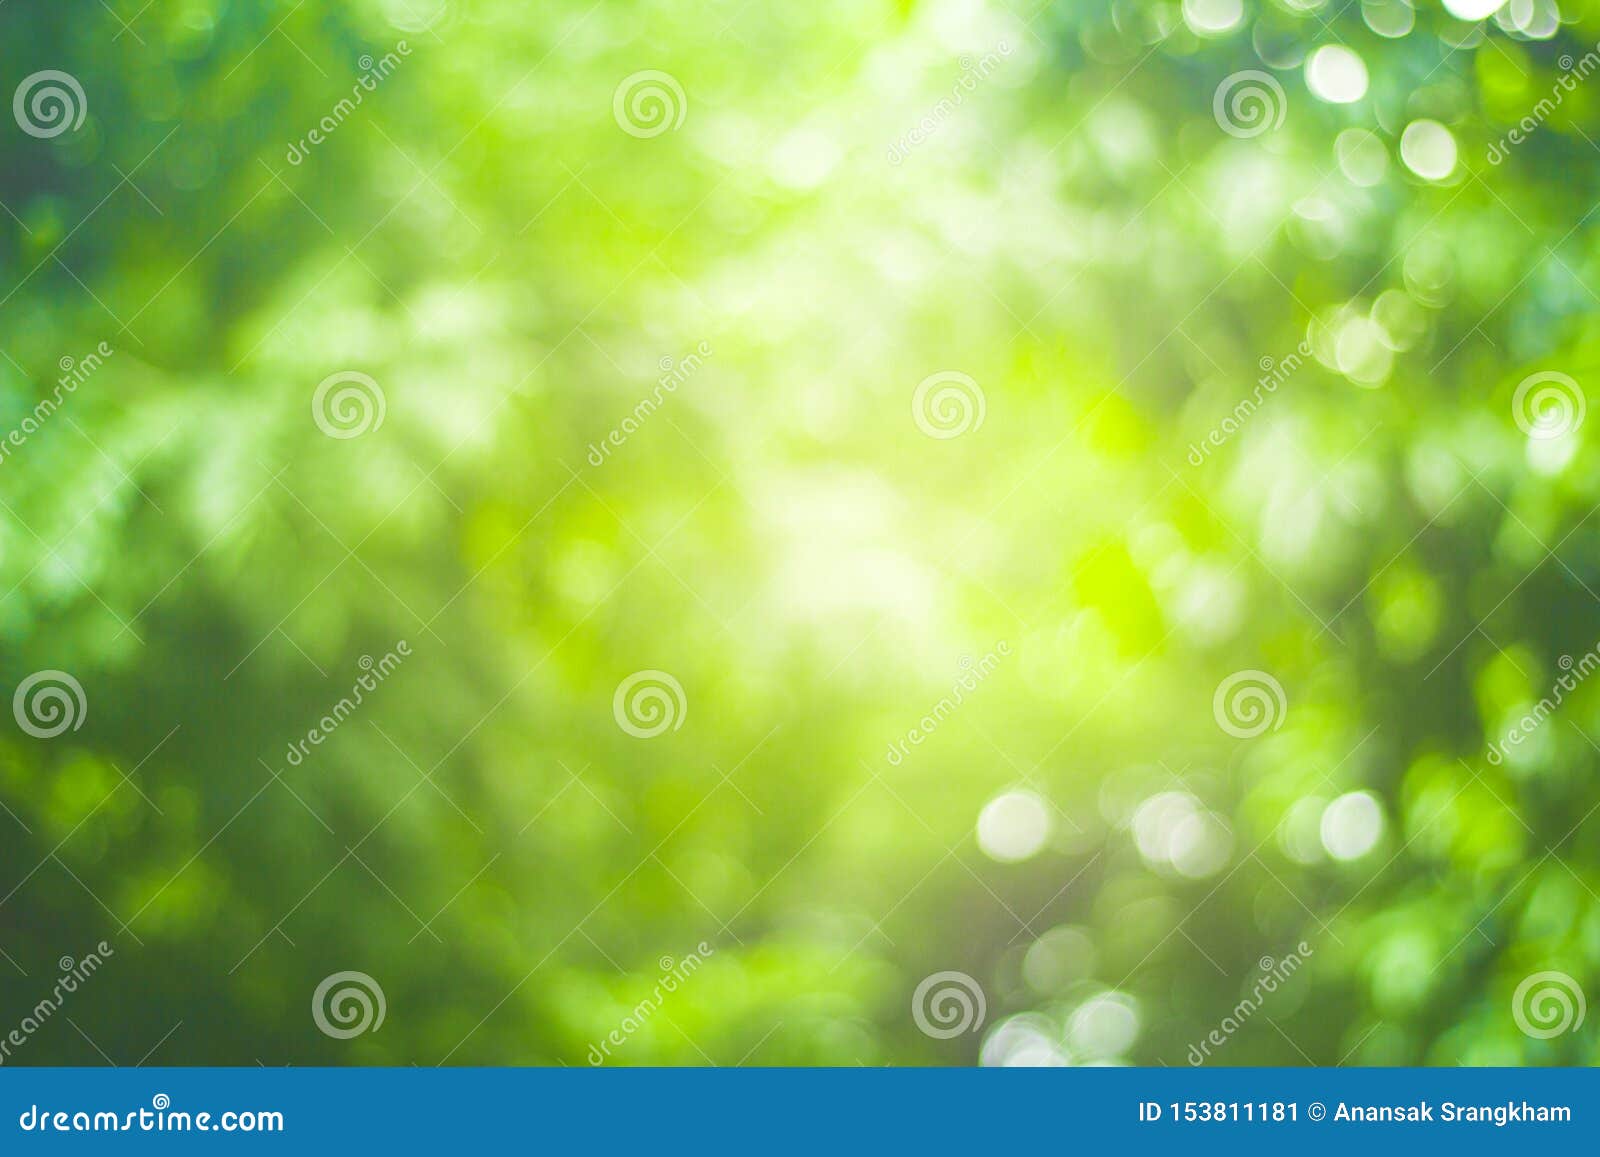 Abstract Green Nature Blur Background and Sunlight Stock Image - Image of  foliage, pattern: 153811181